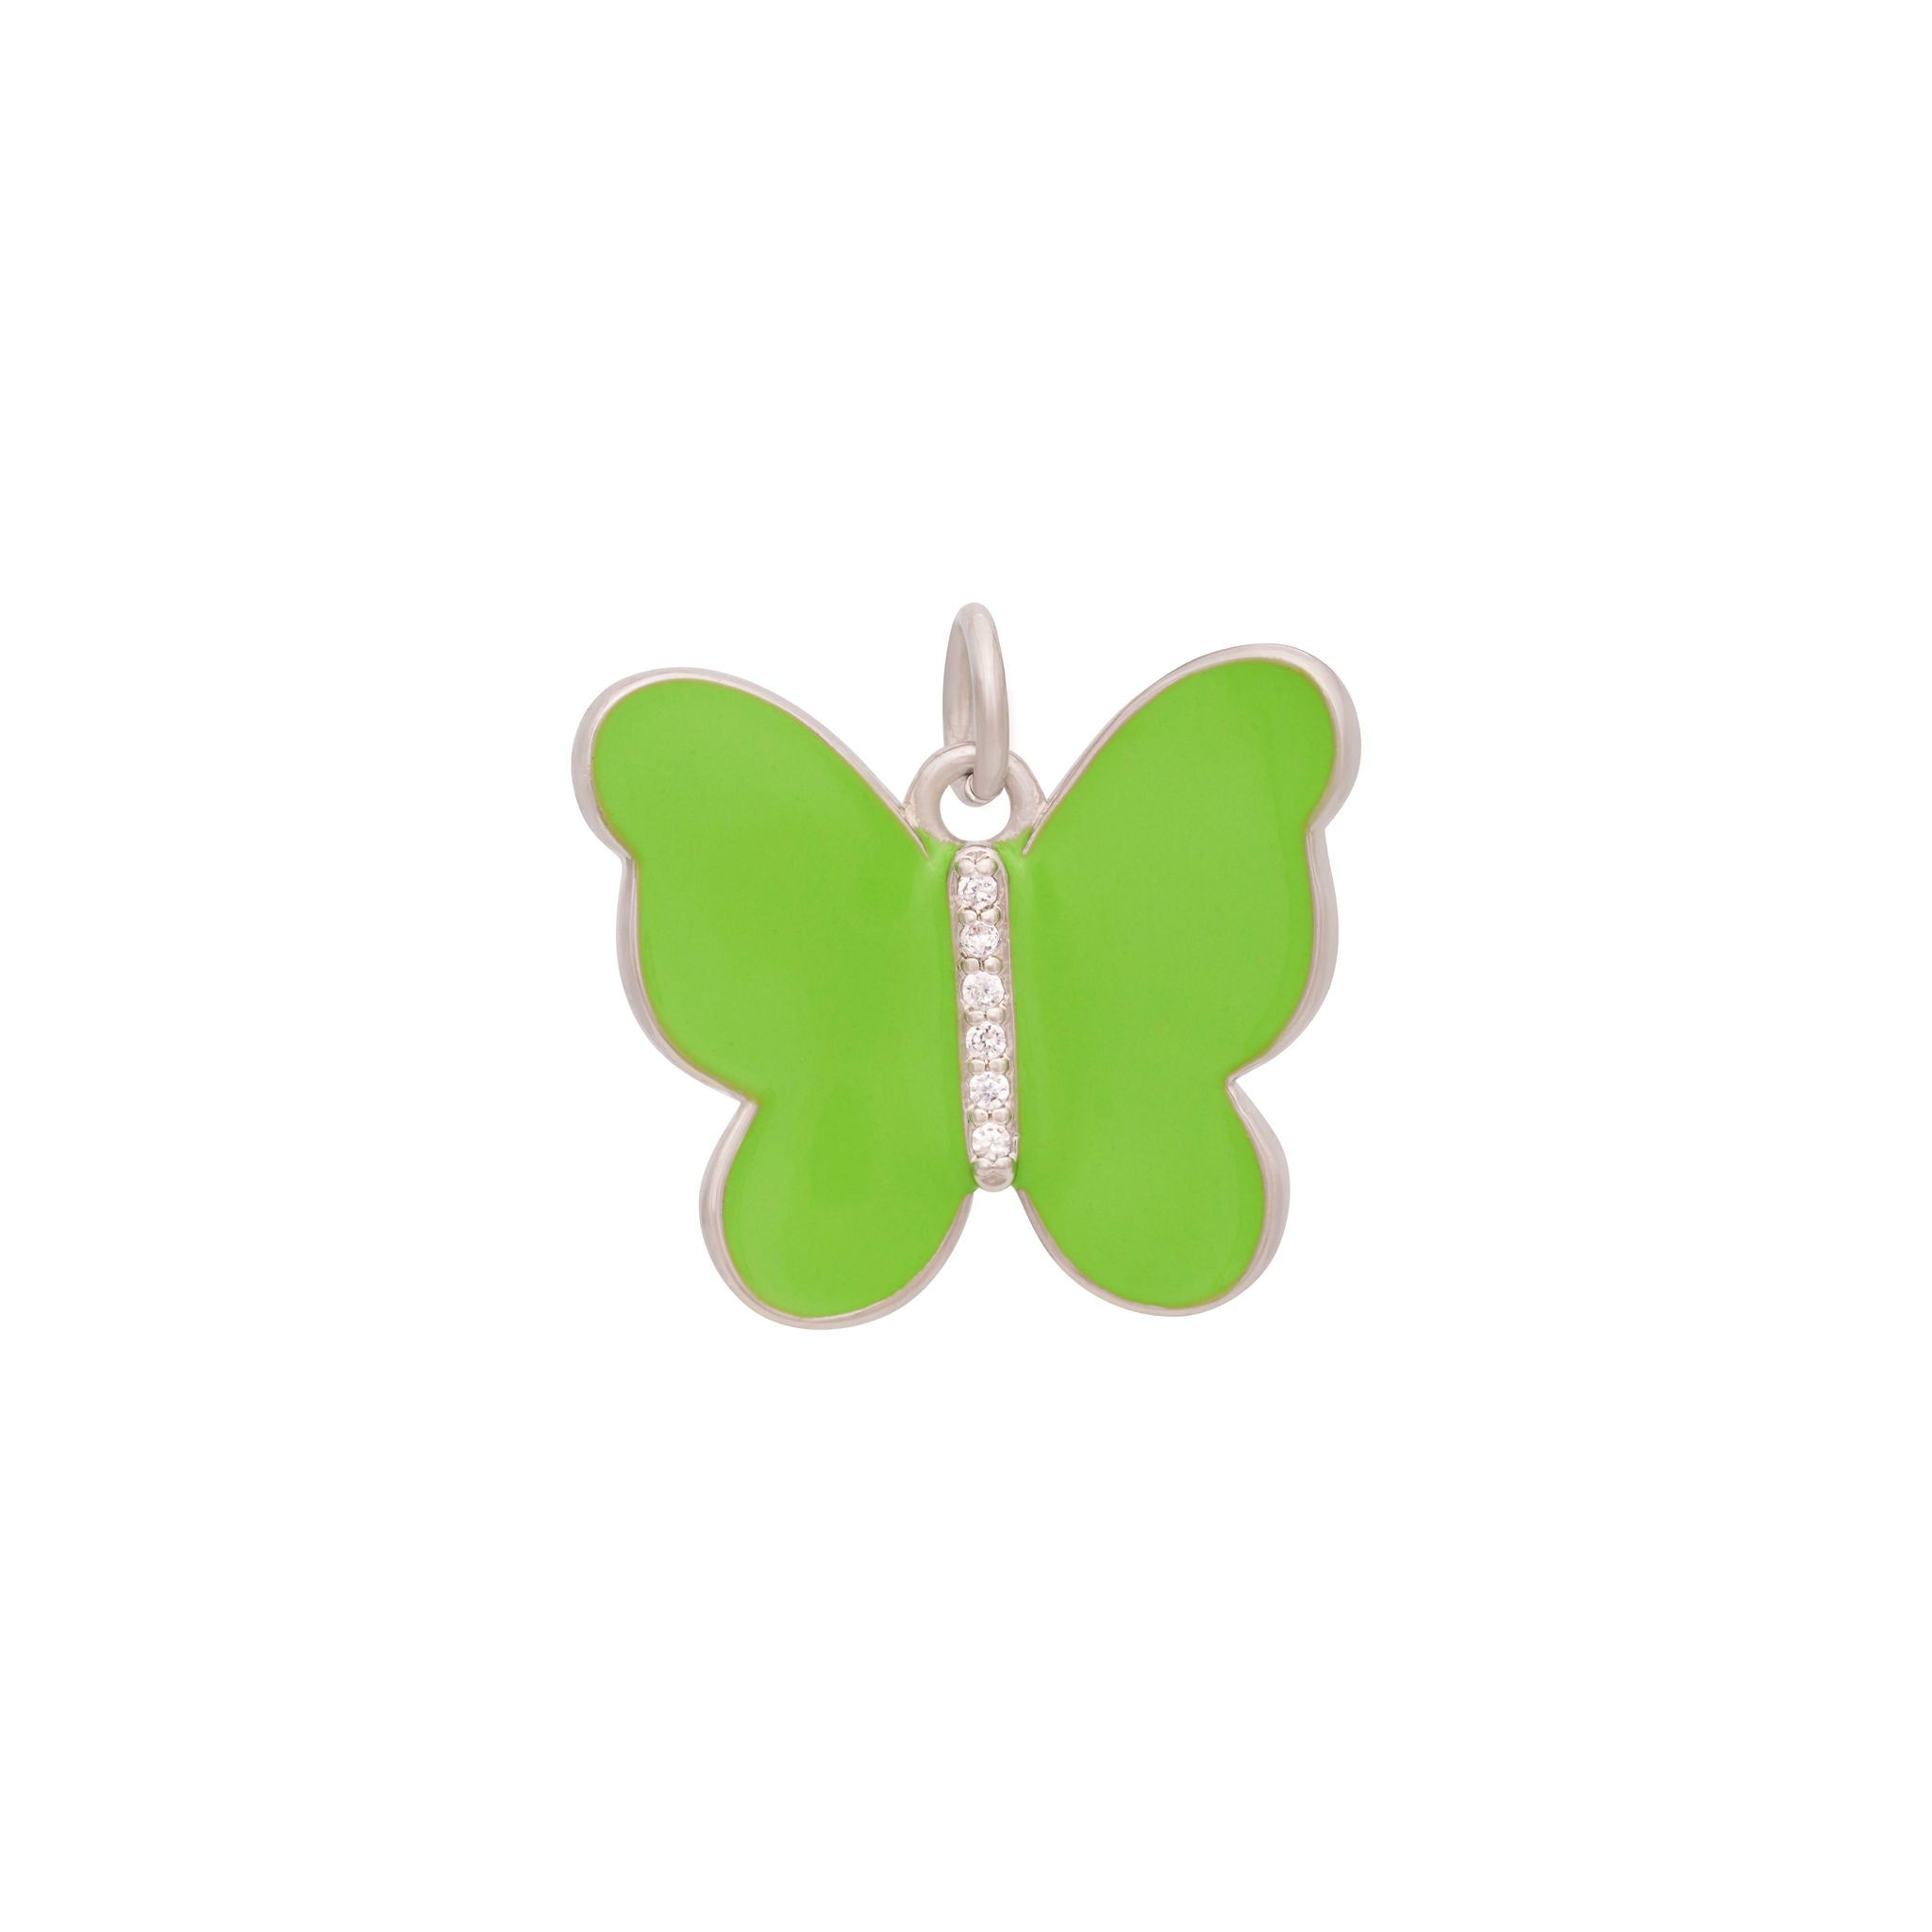 Enamel Butterfly Charms in 5 Colors - Silver